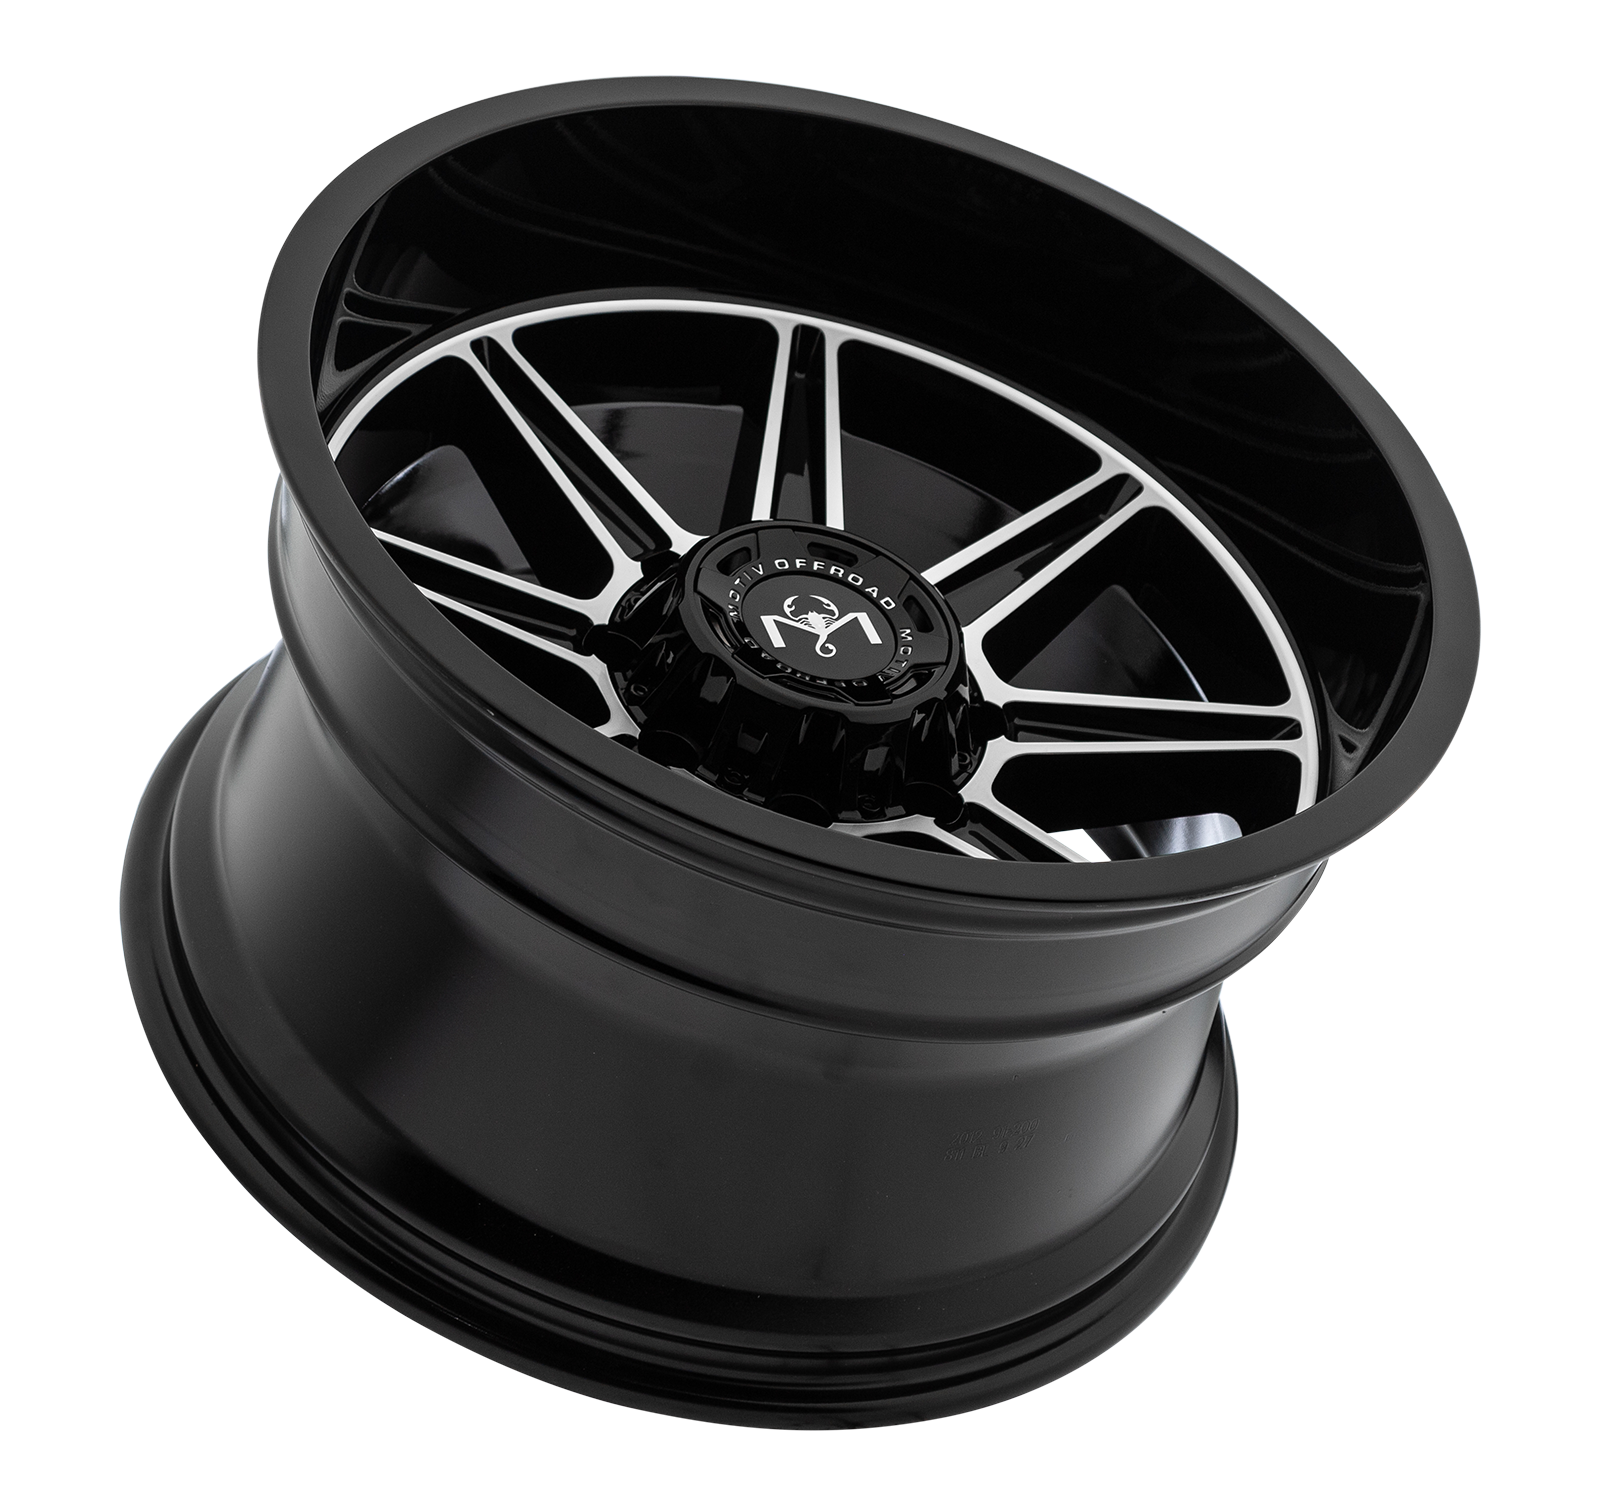 Motiv Off Road BALAST 18X9 +18 6X135/6X5.50 Gloss Black With Machined Face Accents